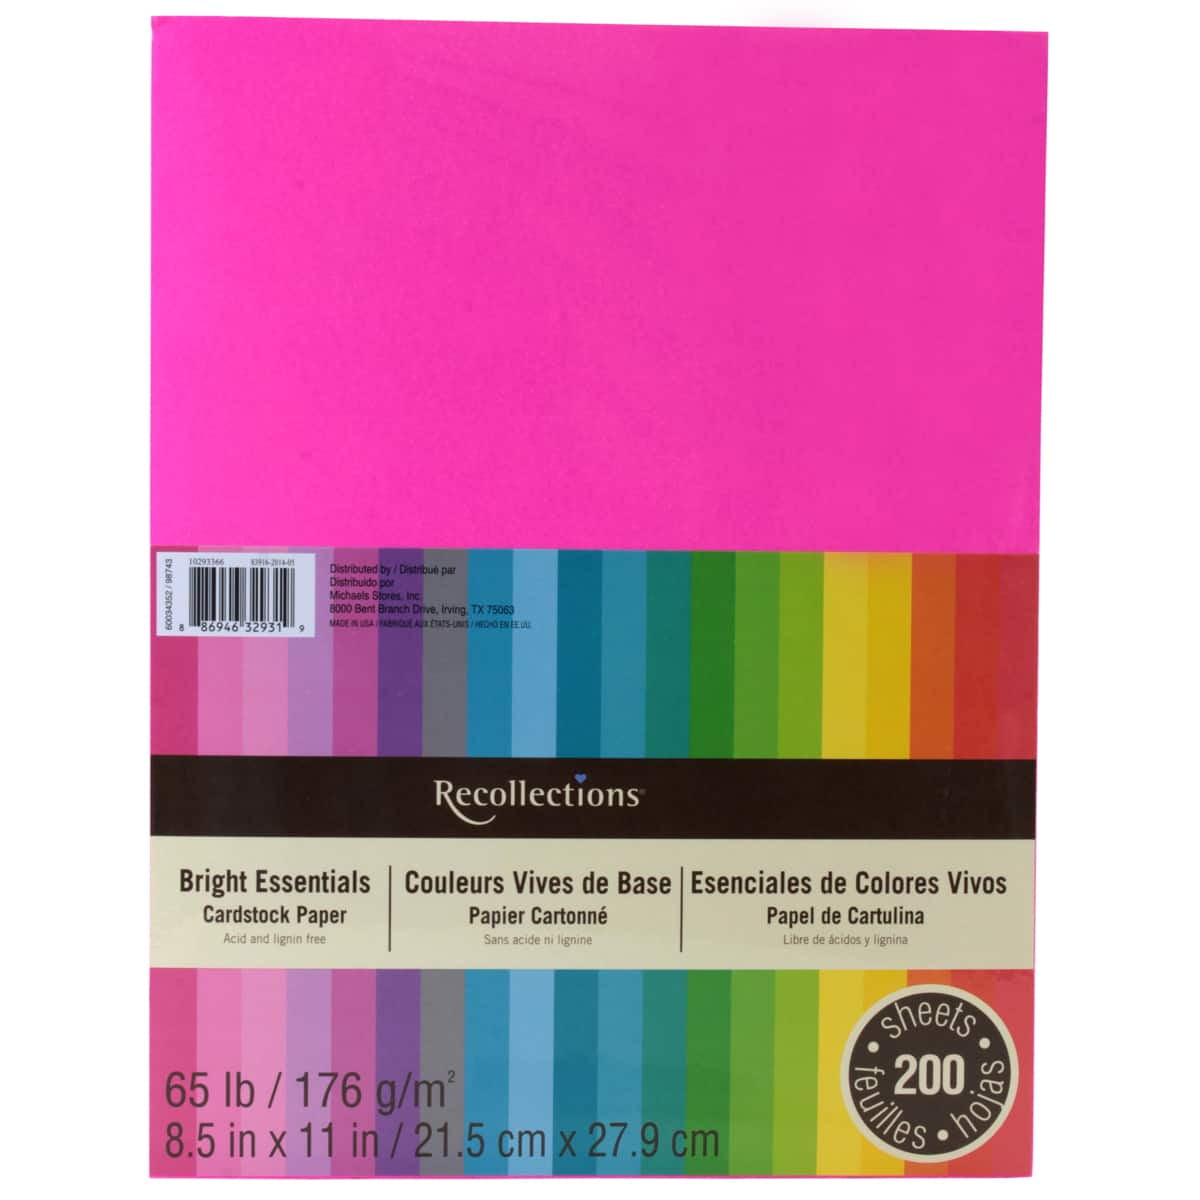 Blue Hues Shimmer 8.5 x 11 Cardstock Paper by Recollections™, 100 Sheets, Michaels